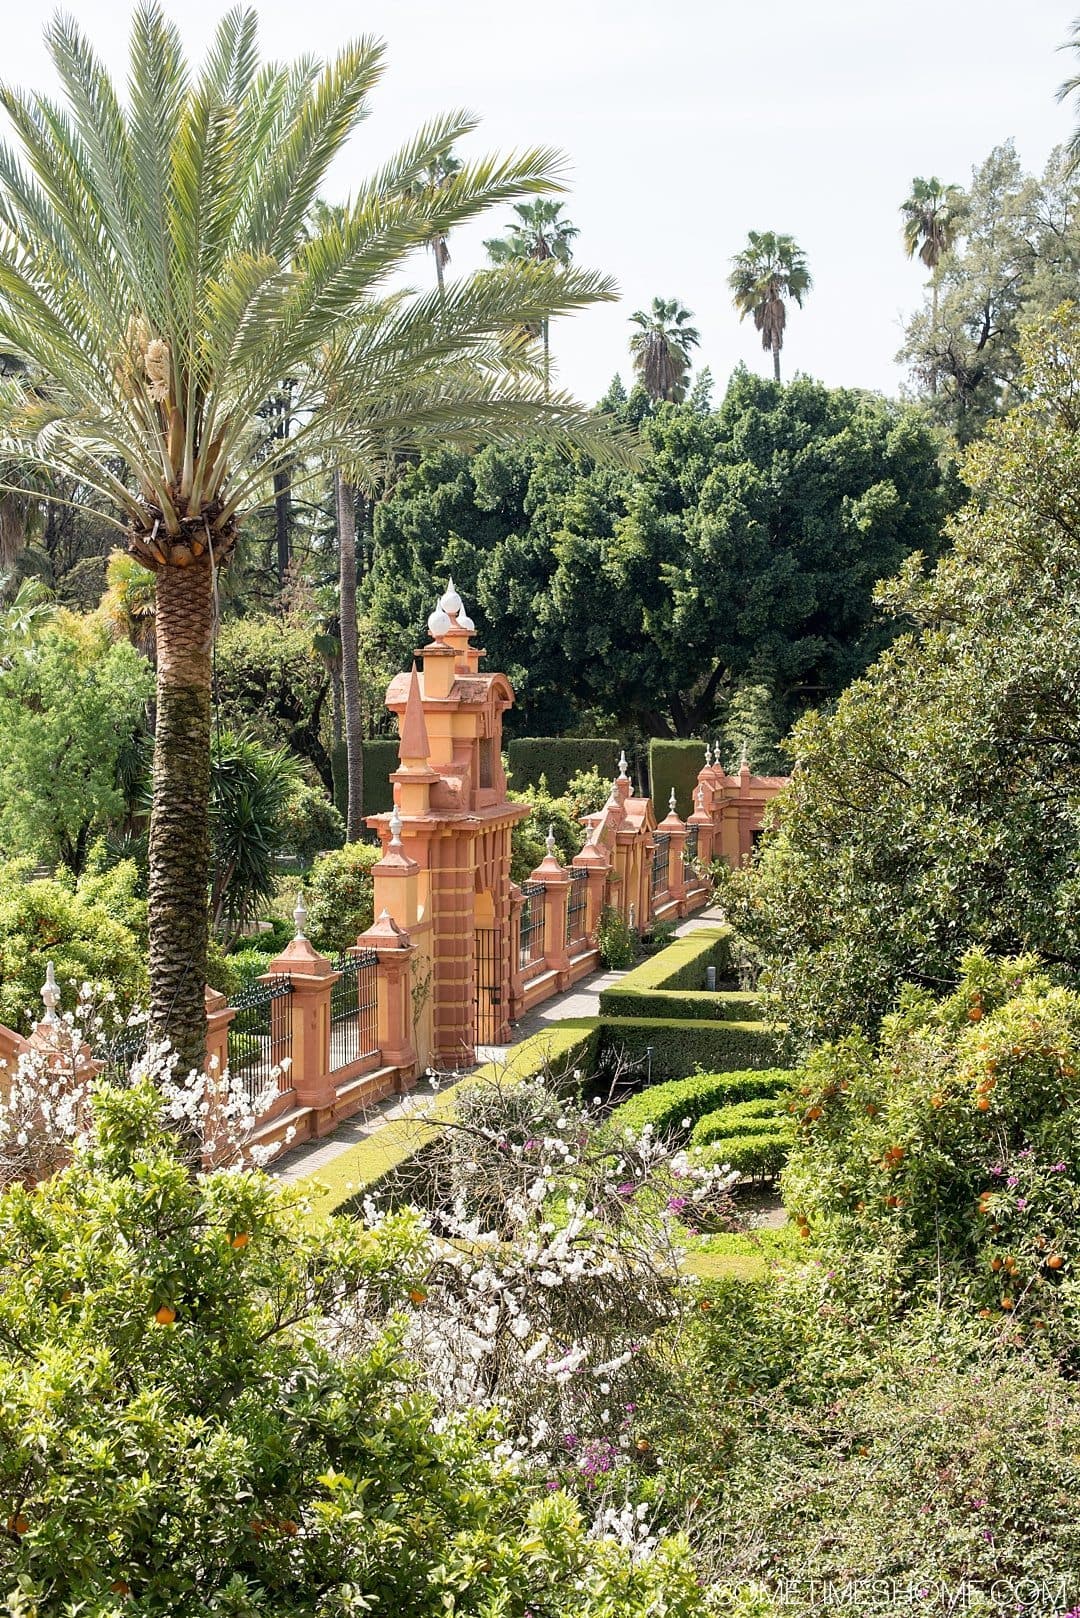 You Haven't Seen Seville Until You've Visited These 3 Sites, by Sometimes Home travel blog. Photo of Real Alcazar exterior gardens.